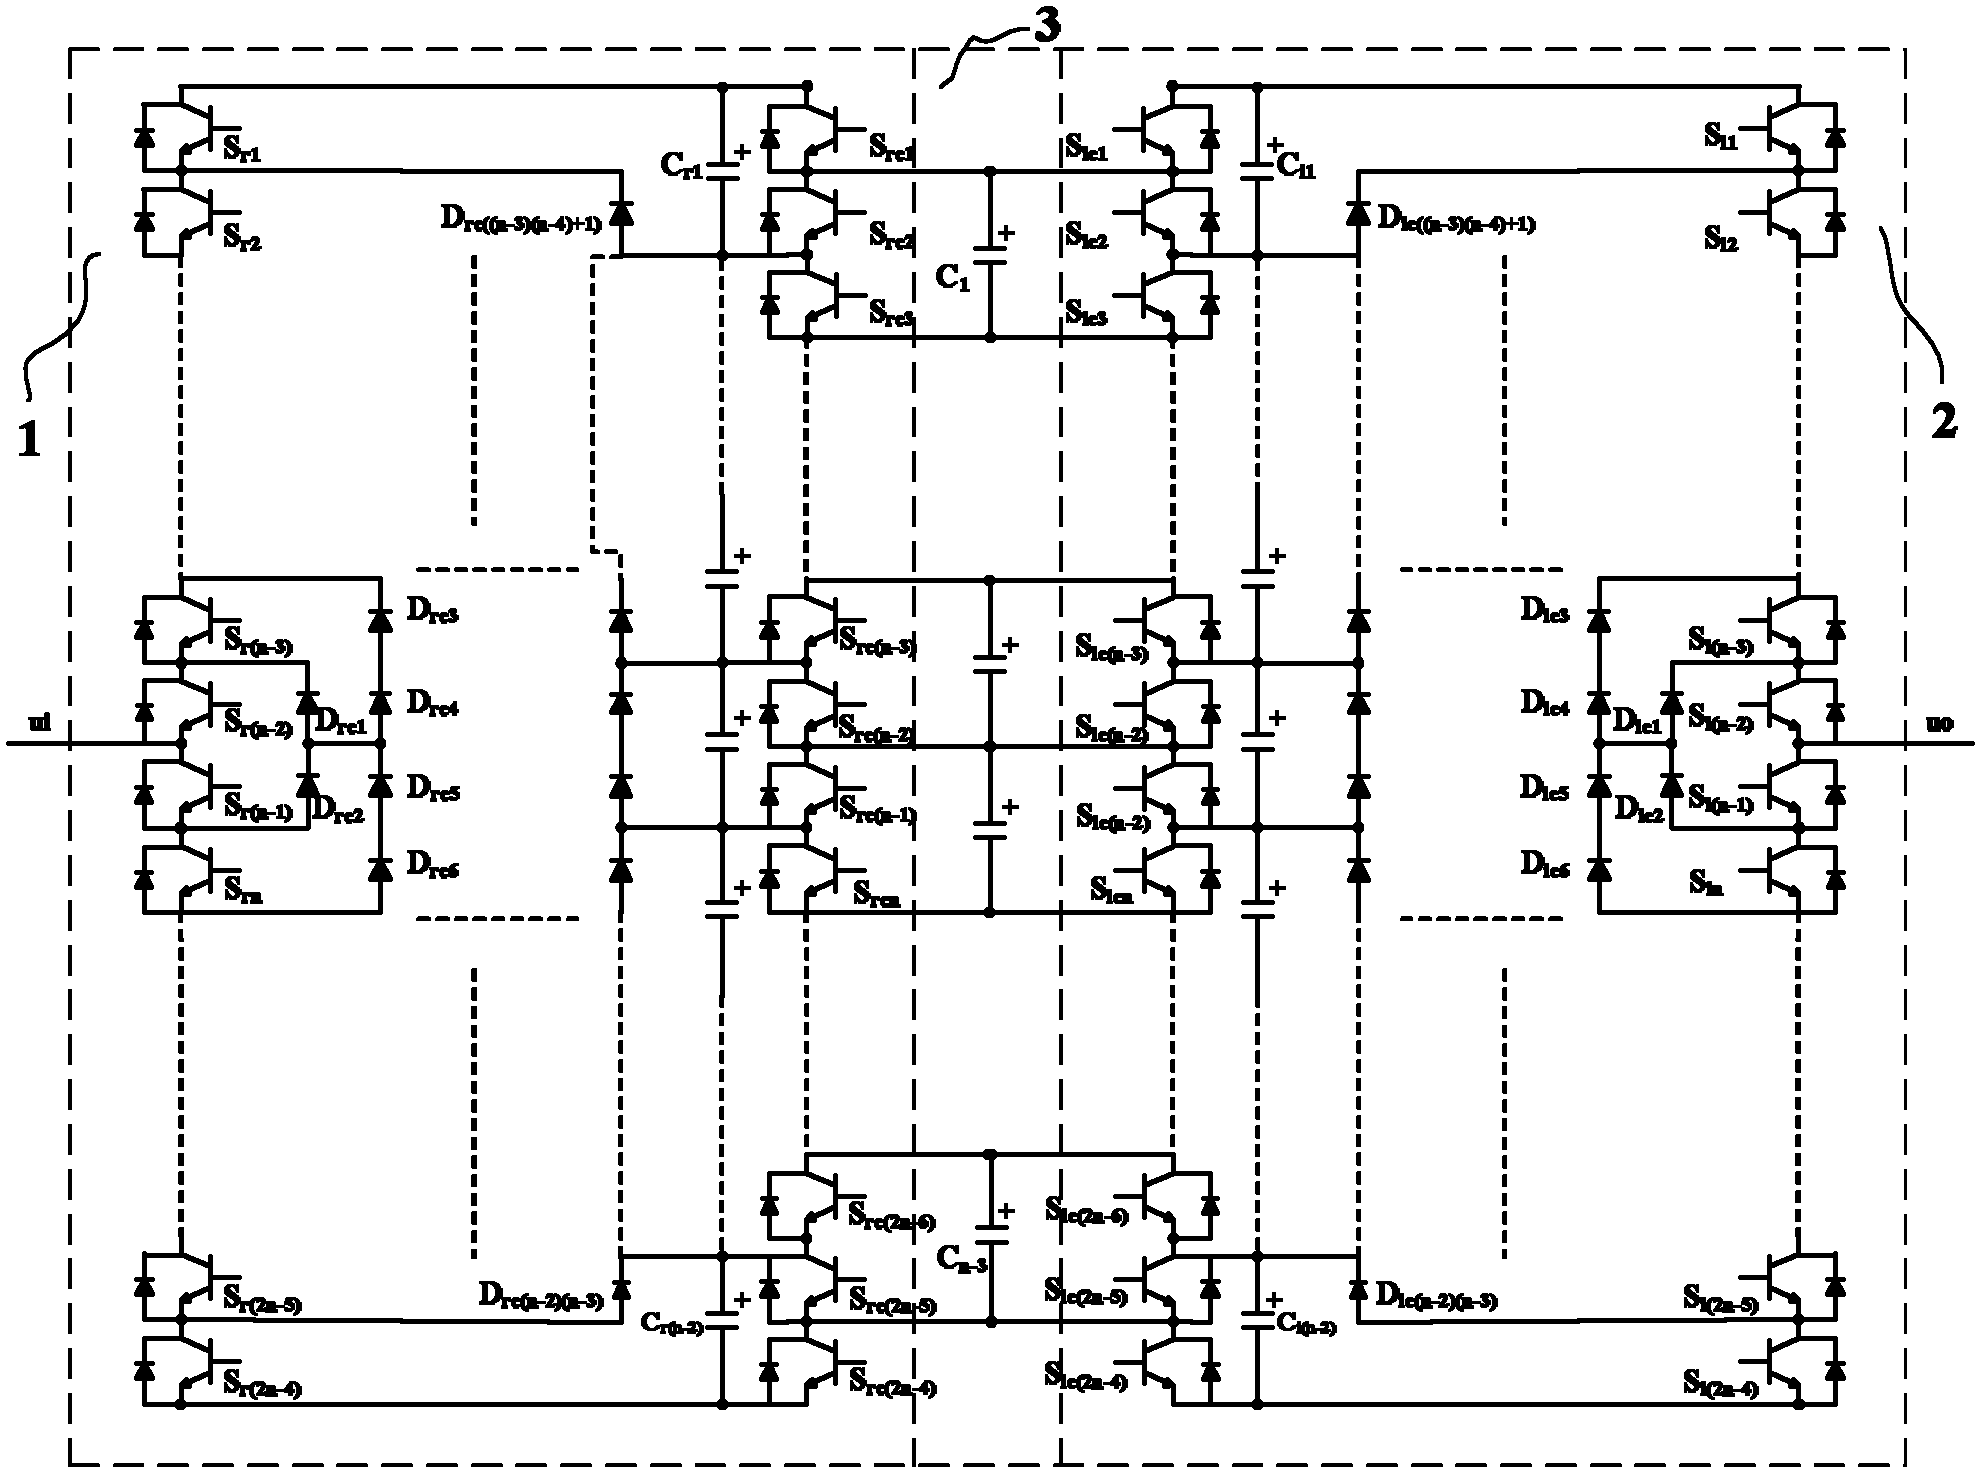 Mixed clamping back-to-back multi-level AC-DC-AC switching circuit